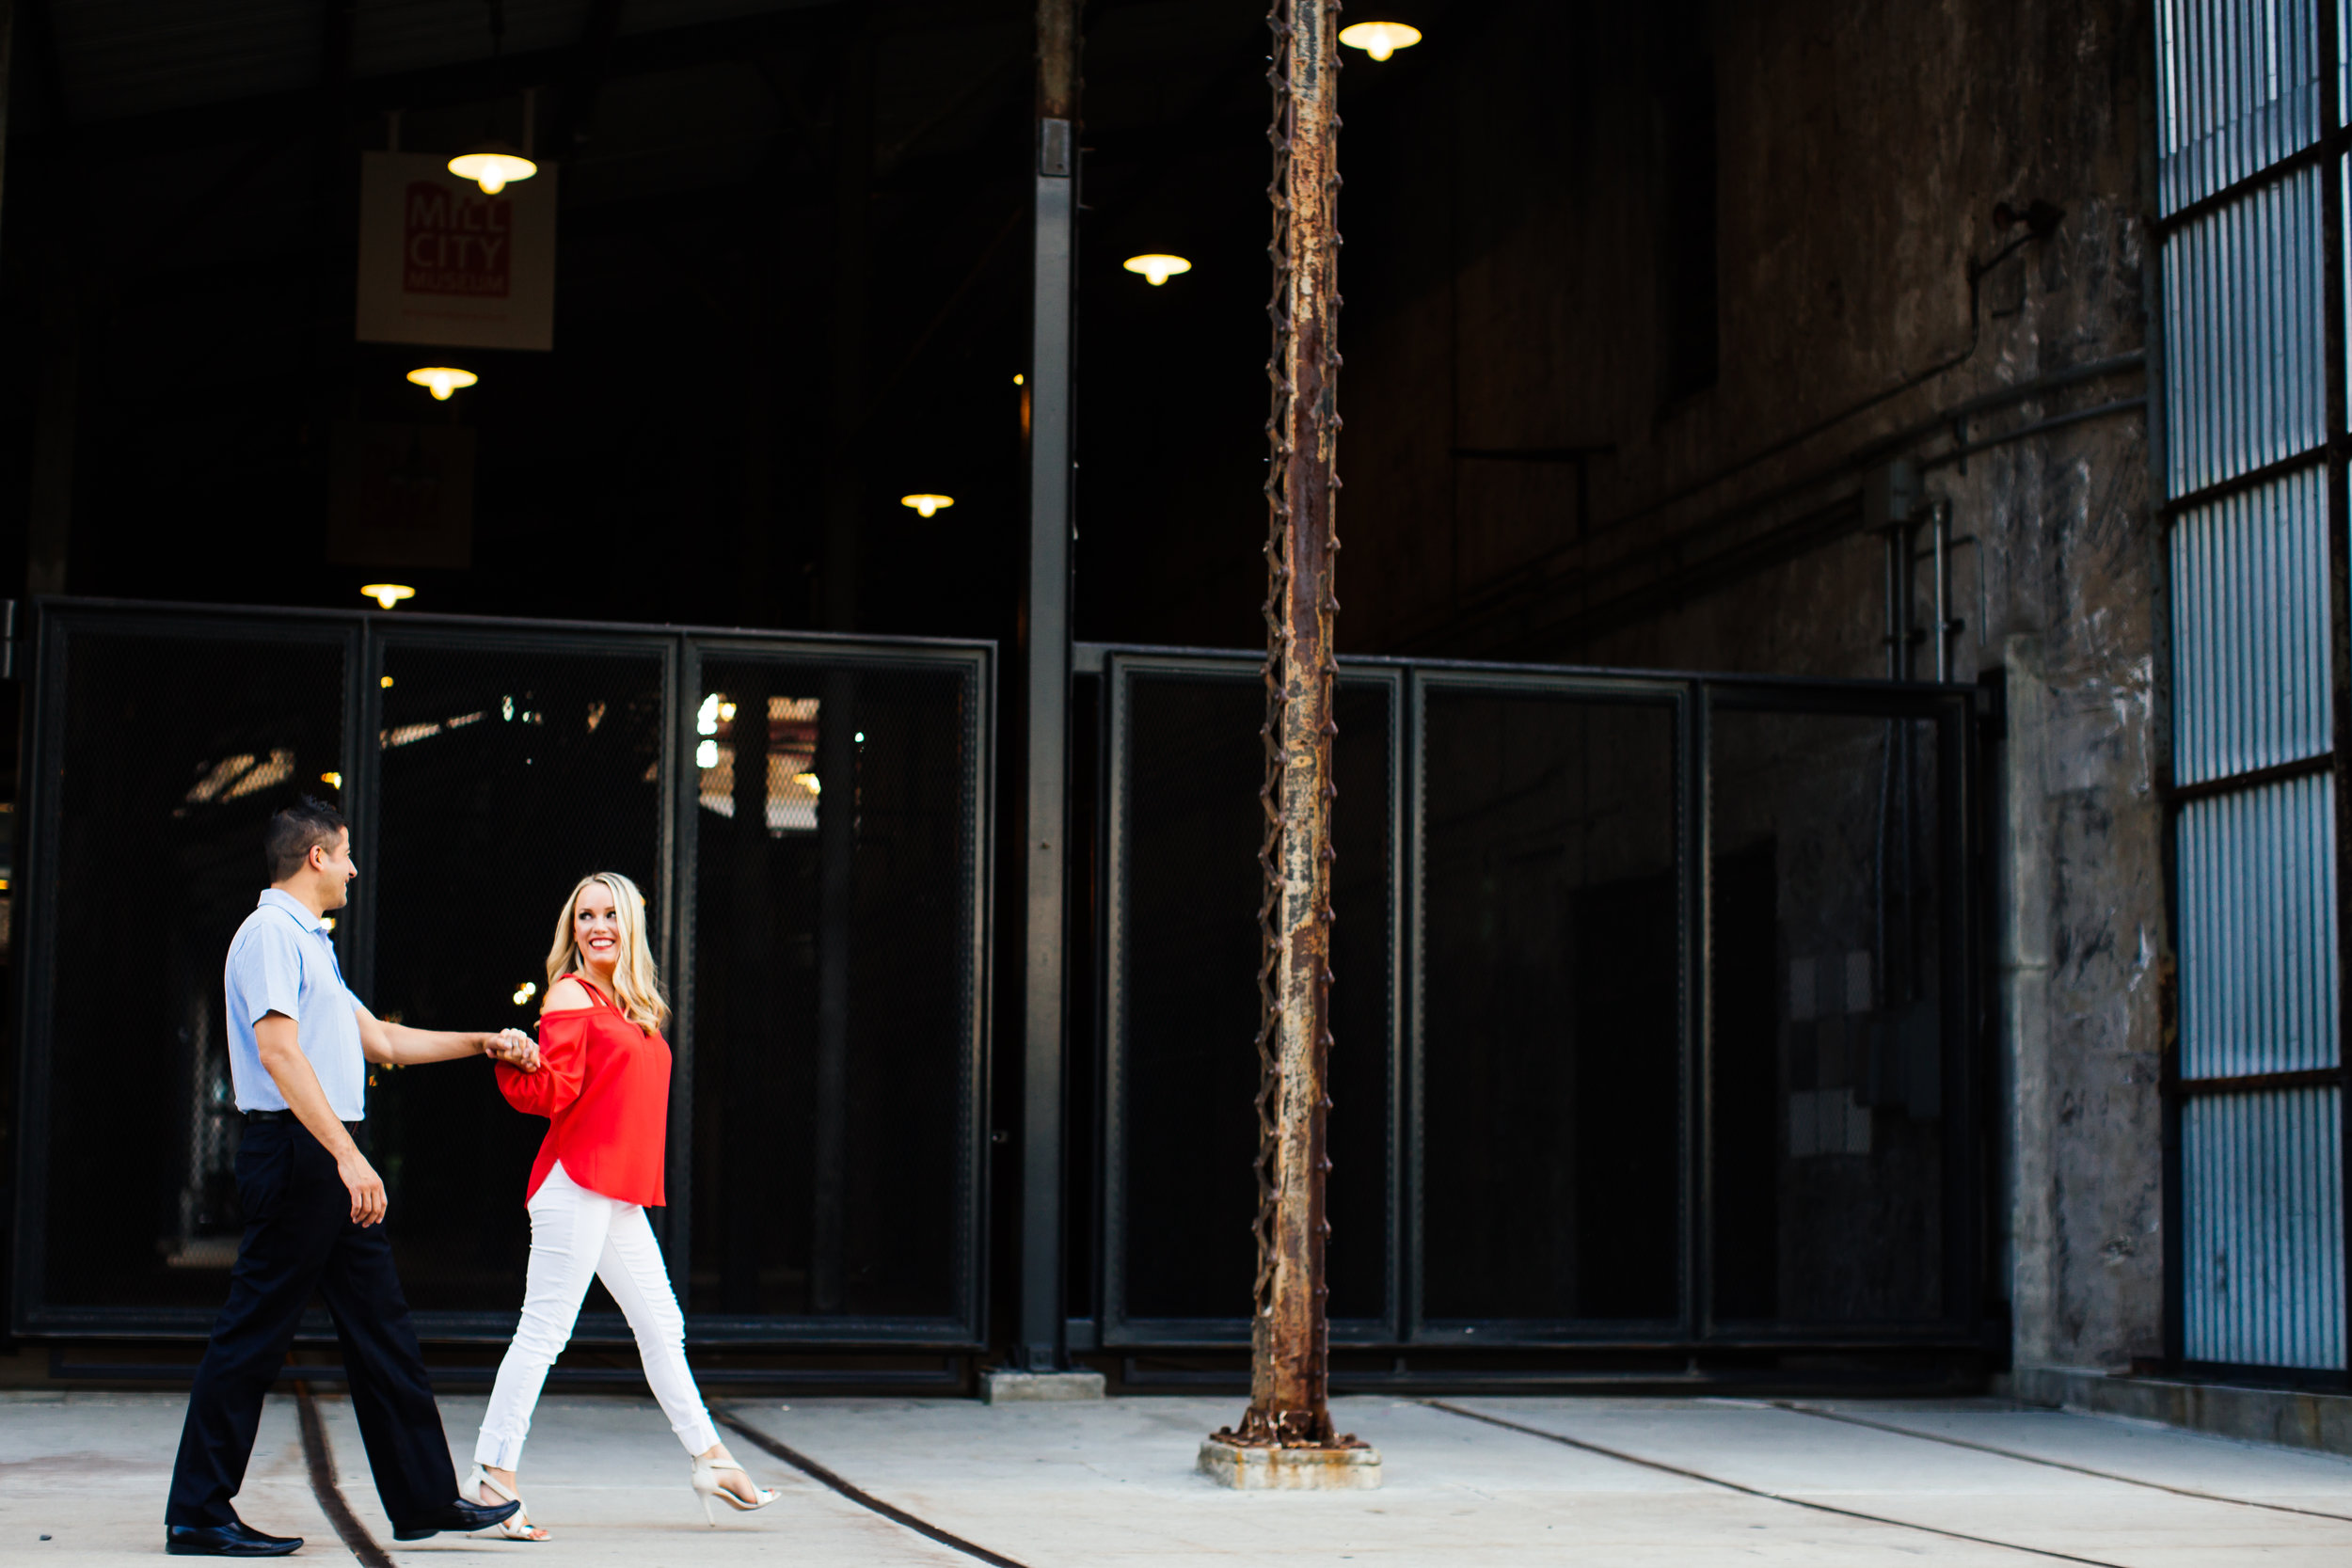 Romantic stroll in Downtown Minneapolis for an engagement session